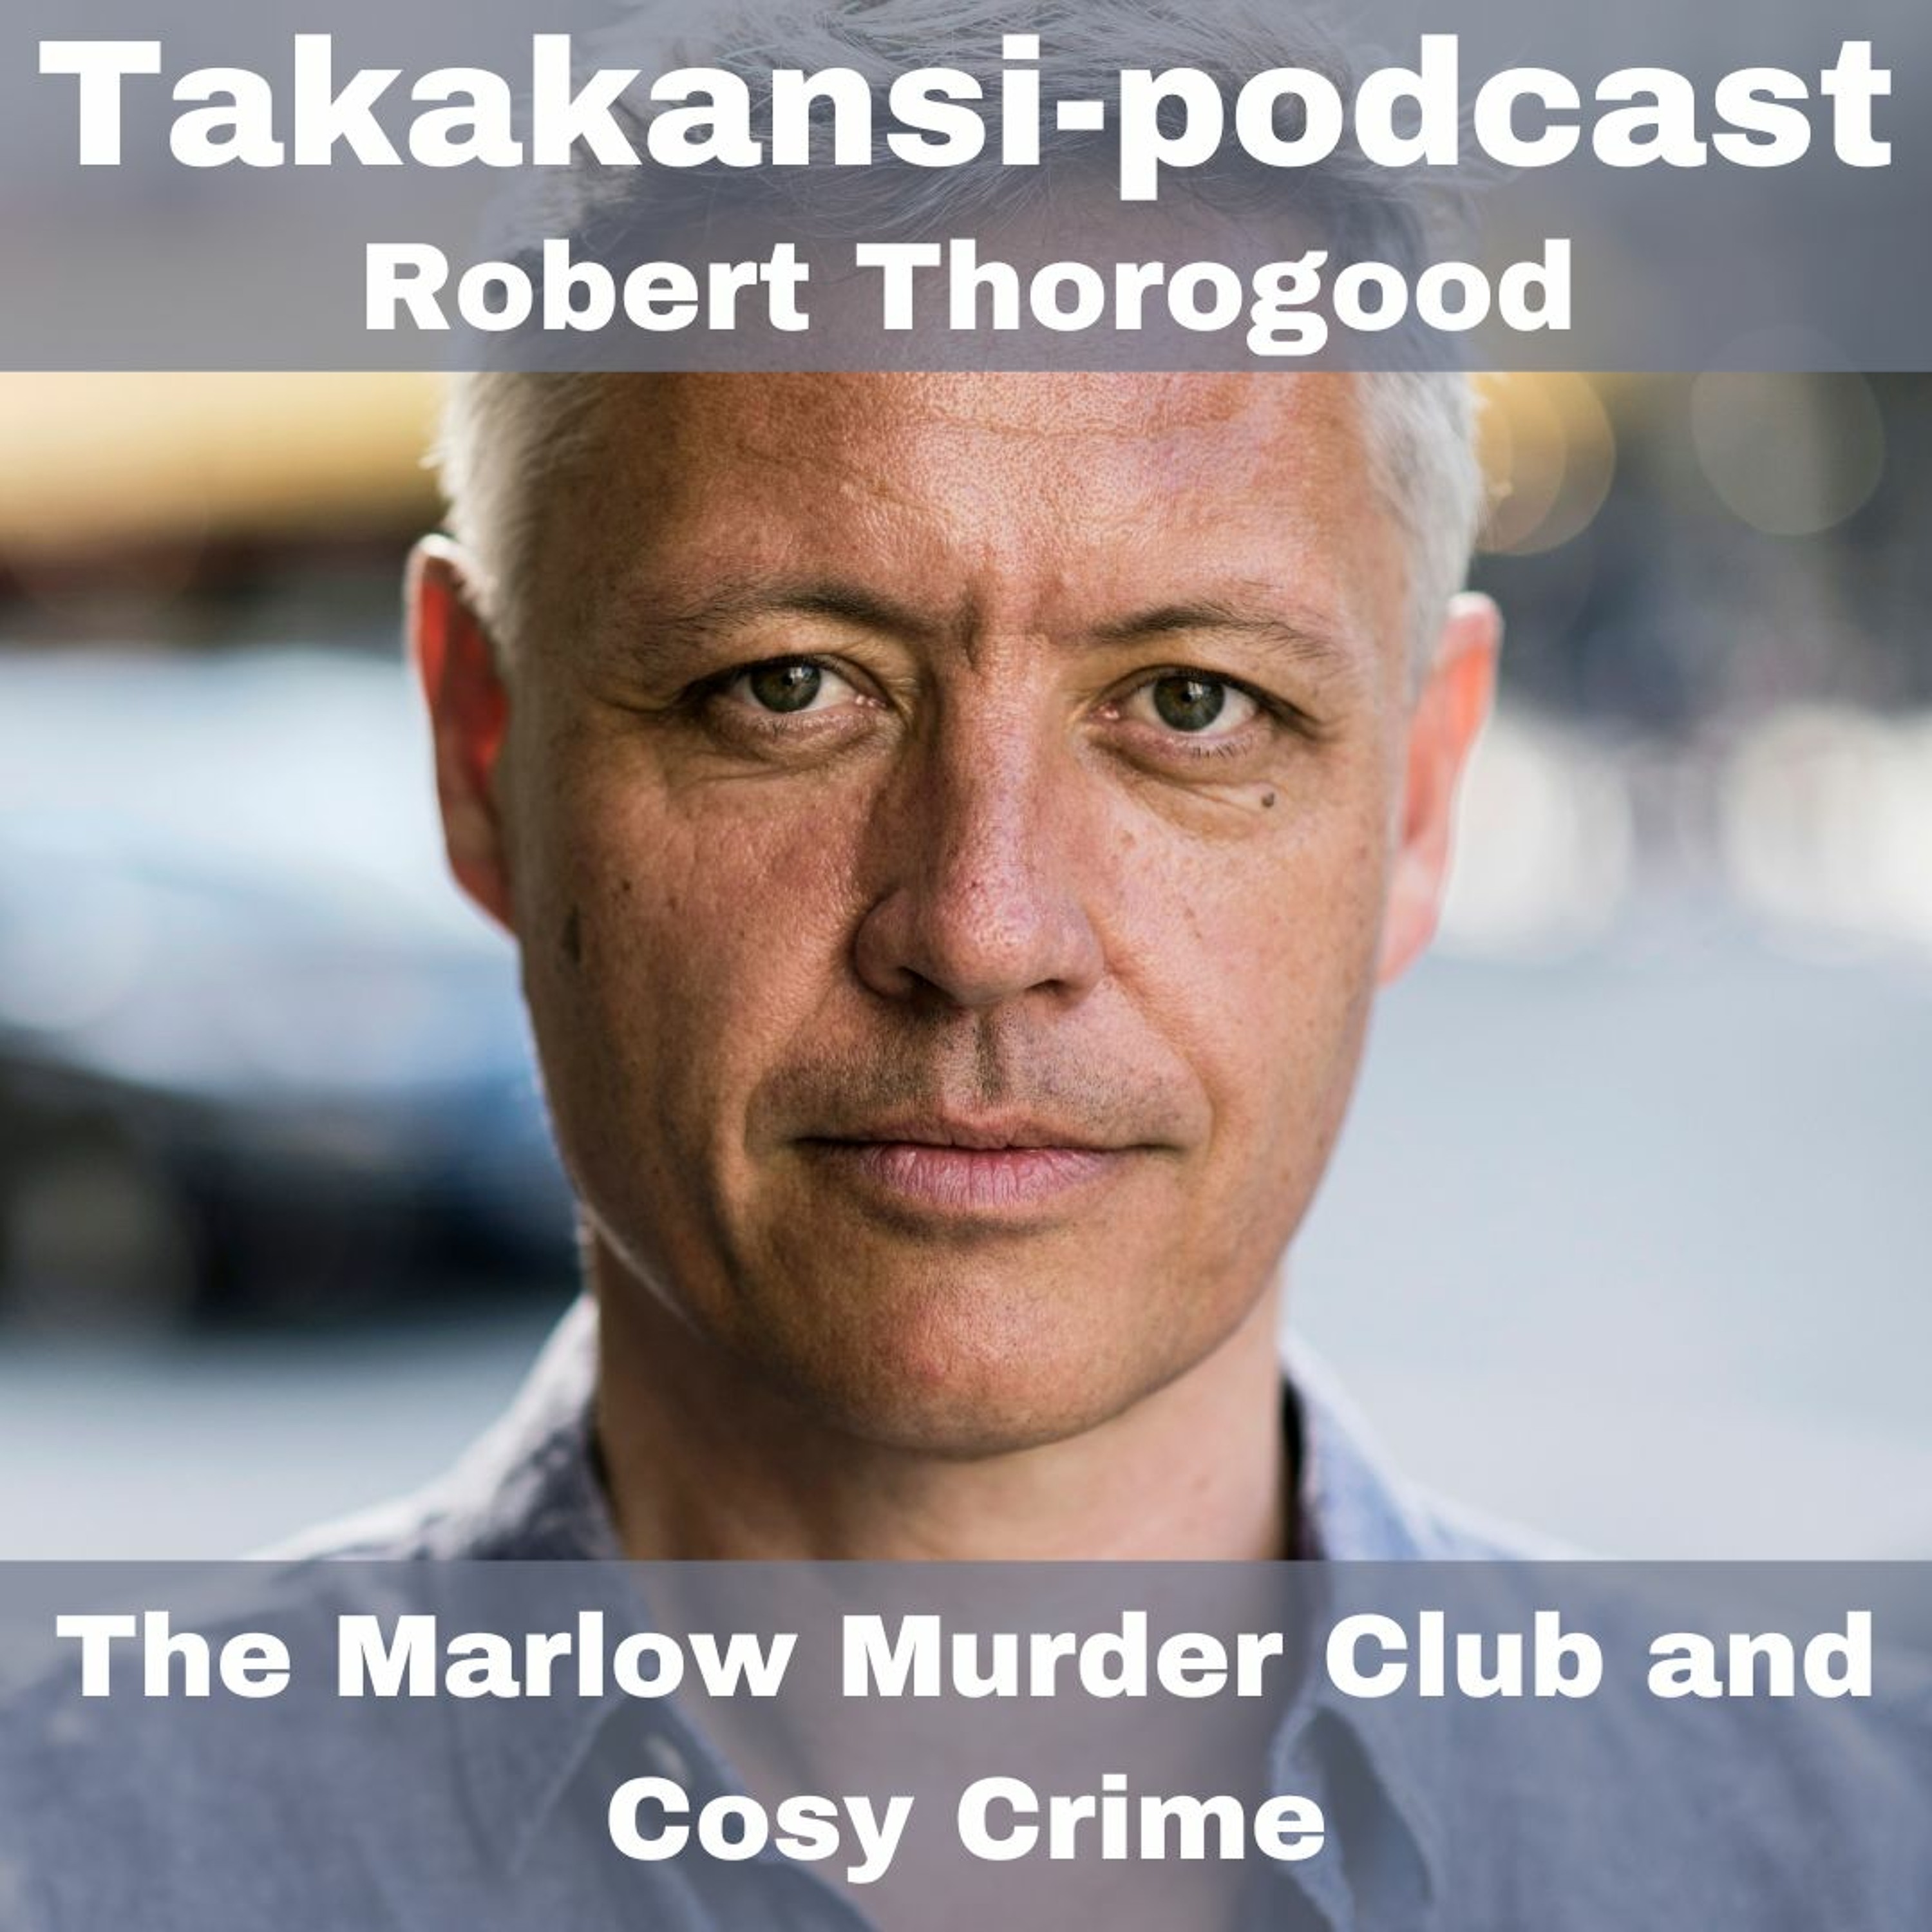 Robert Thorogood - The Marlow Murder Club and Cosy Crime